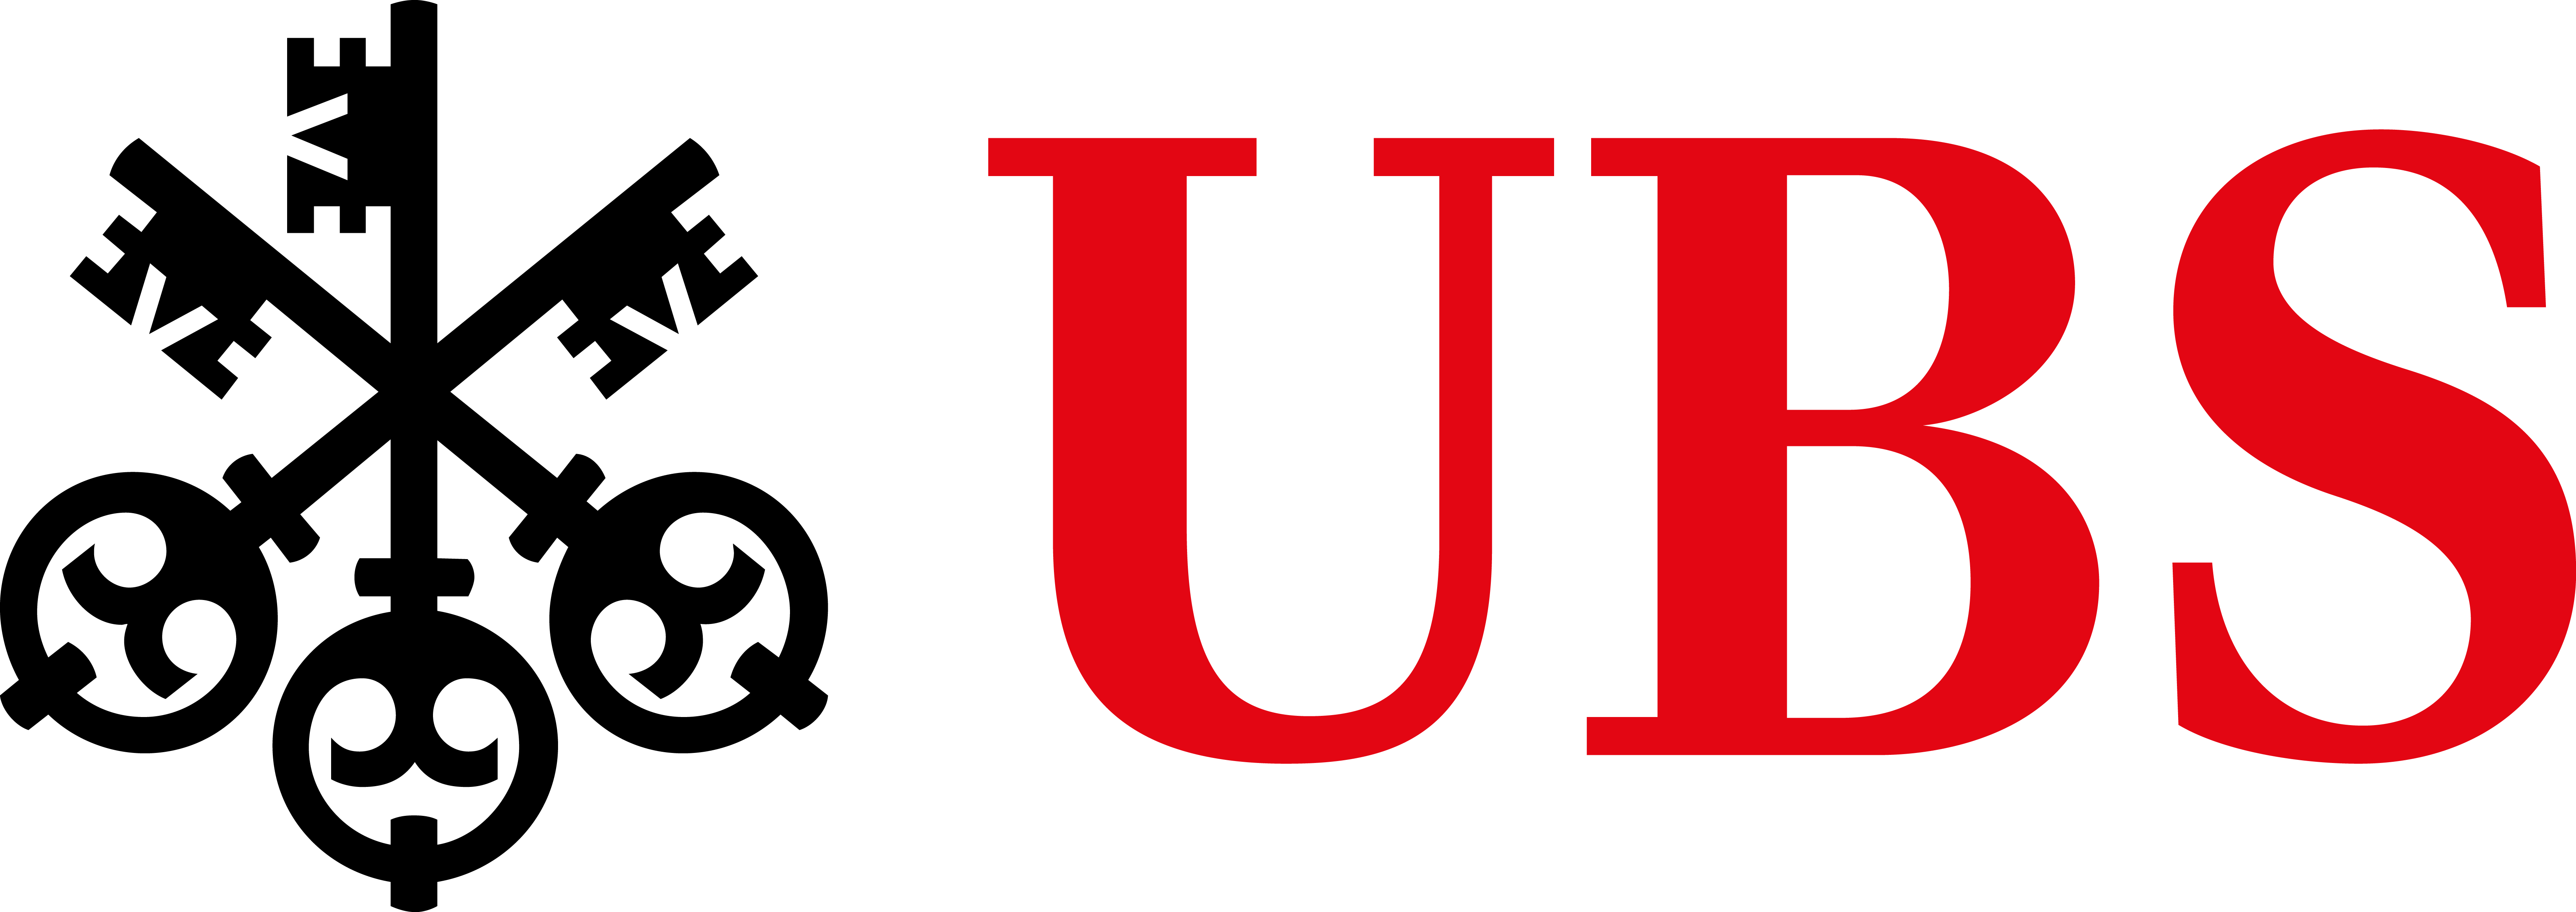 Apply to UBS